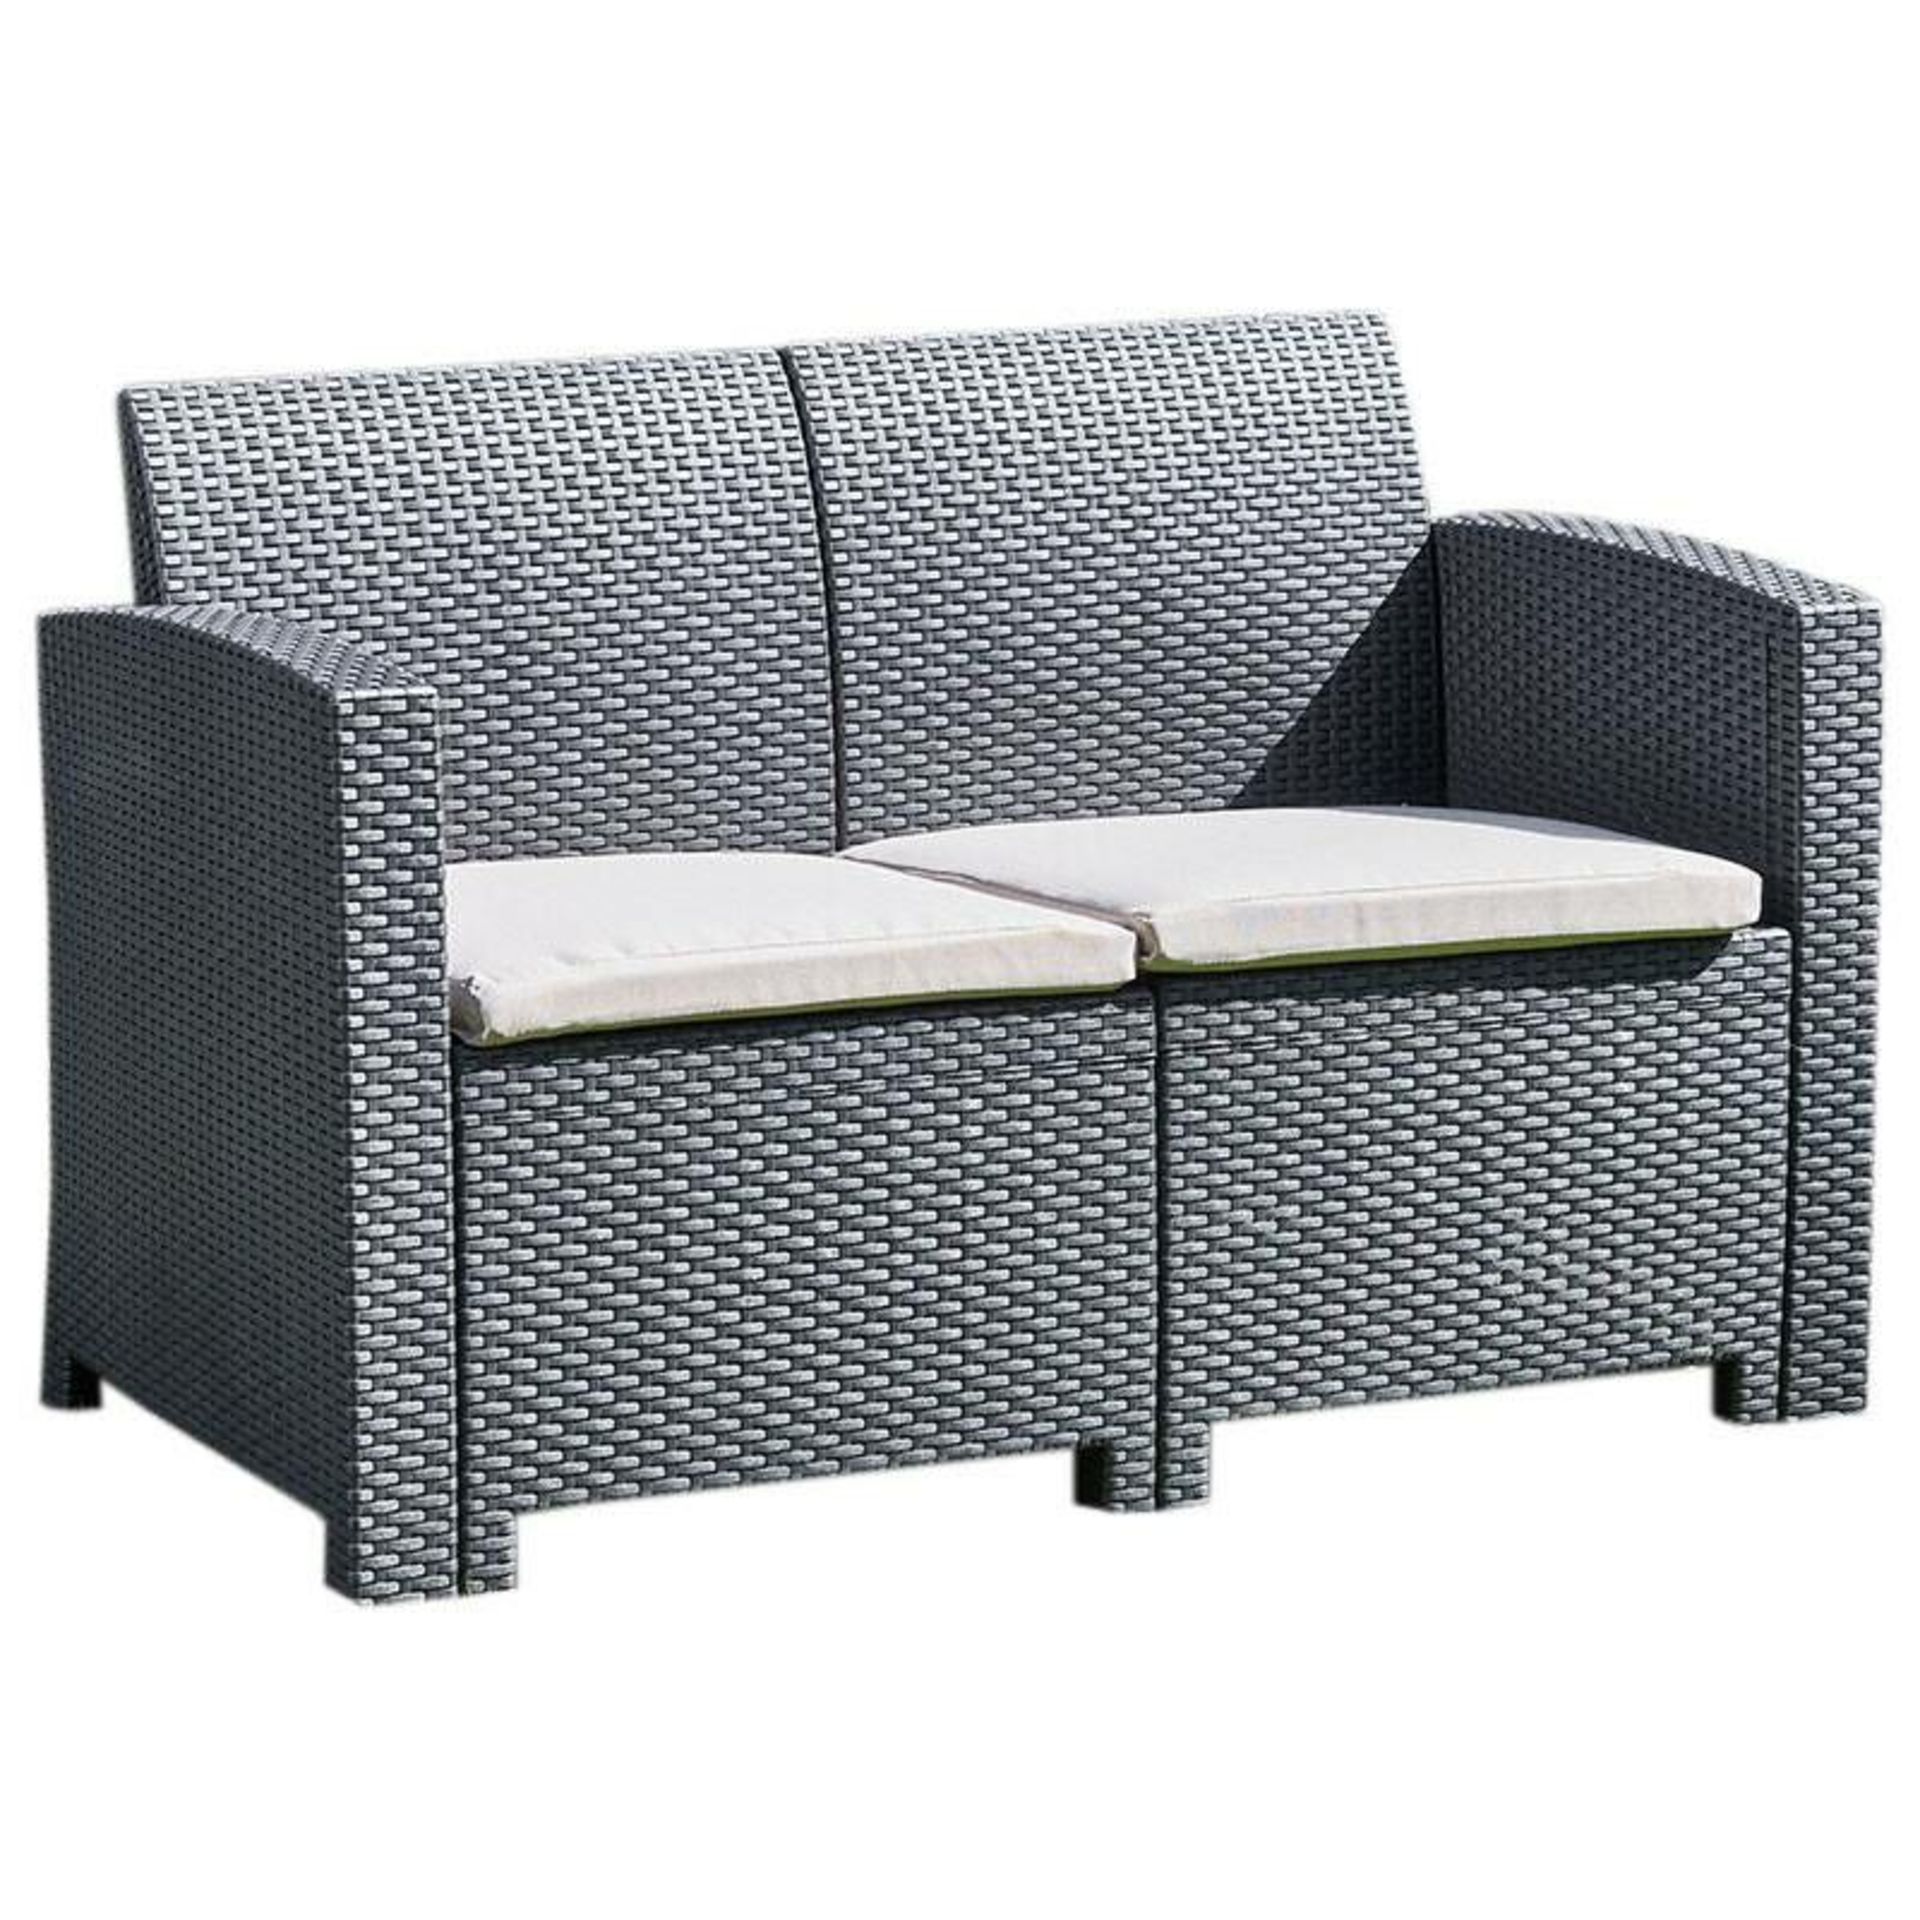 BRAND NEW ABREO 2 SEATER RATTAN SOFA (PLEASE NOTE SOFA ONLY) S1R5